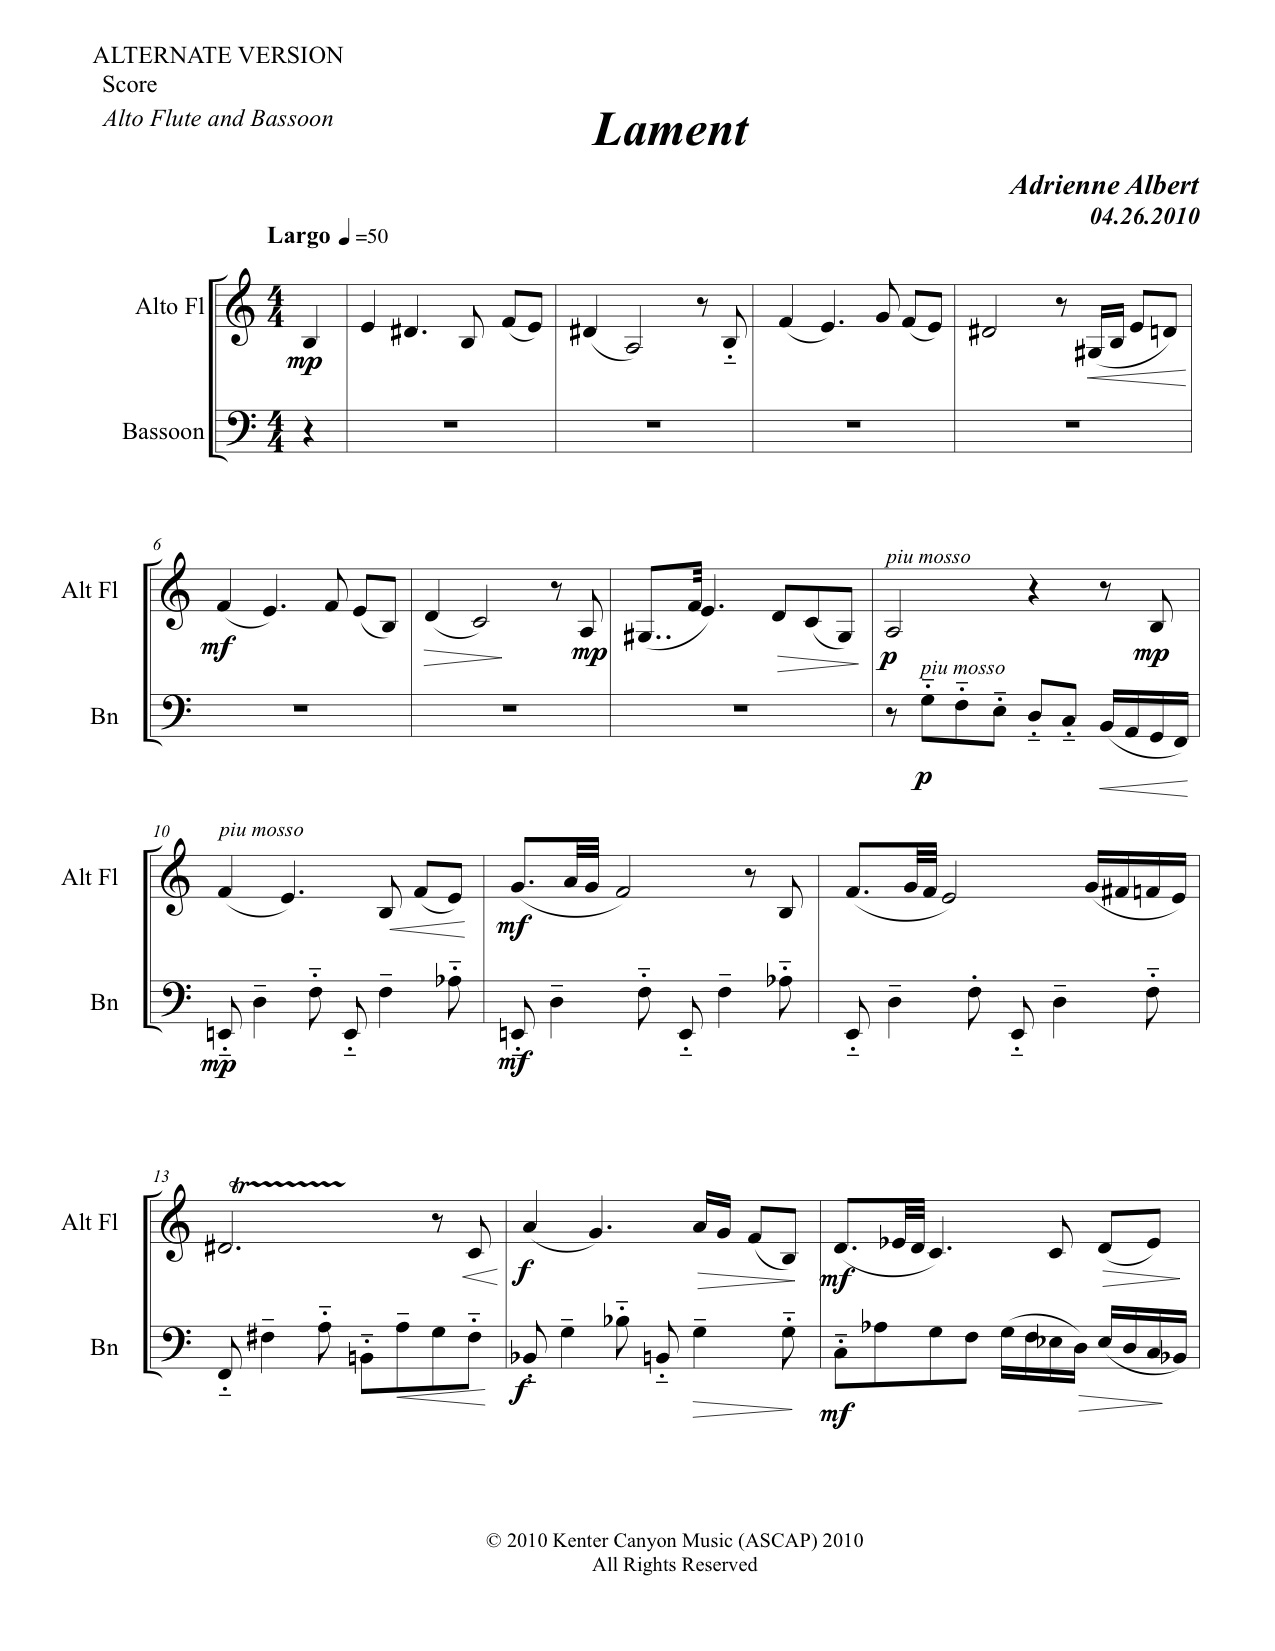 Lament for Alto Flute and Bassoon